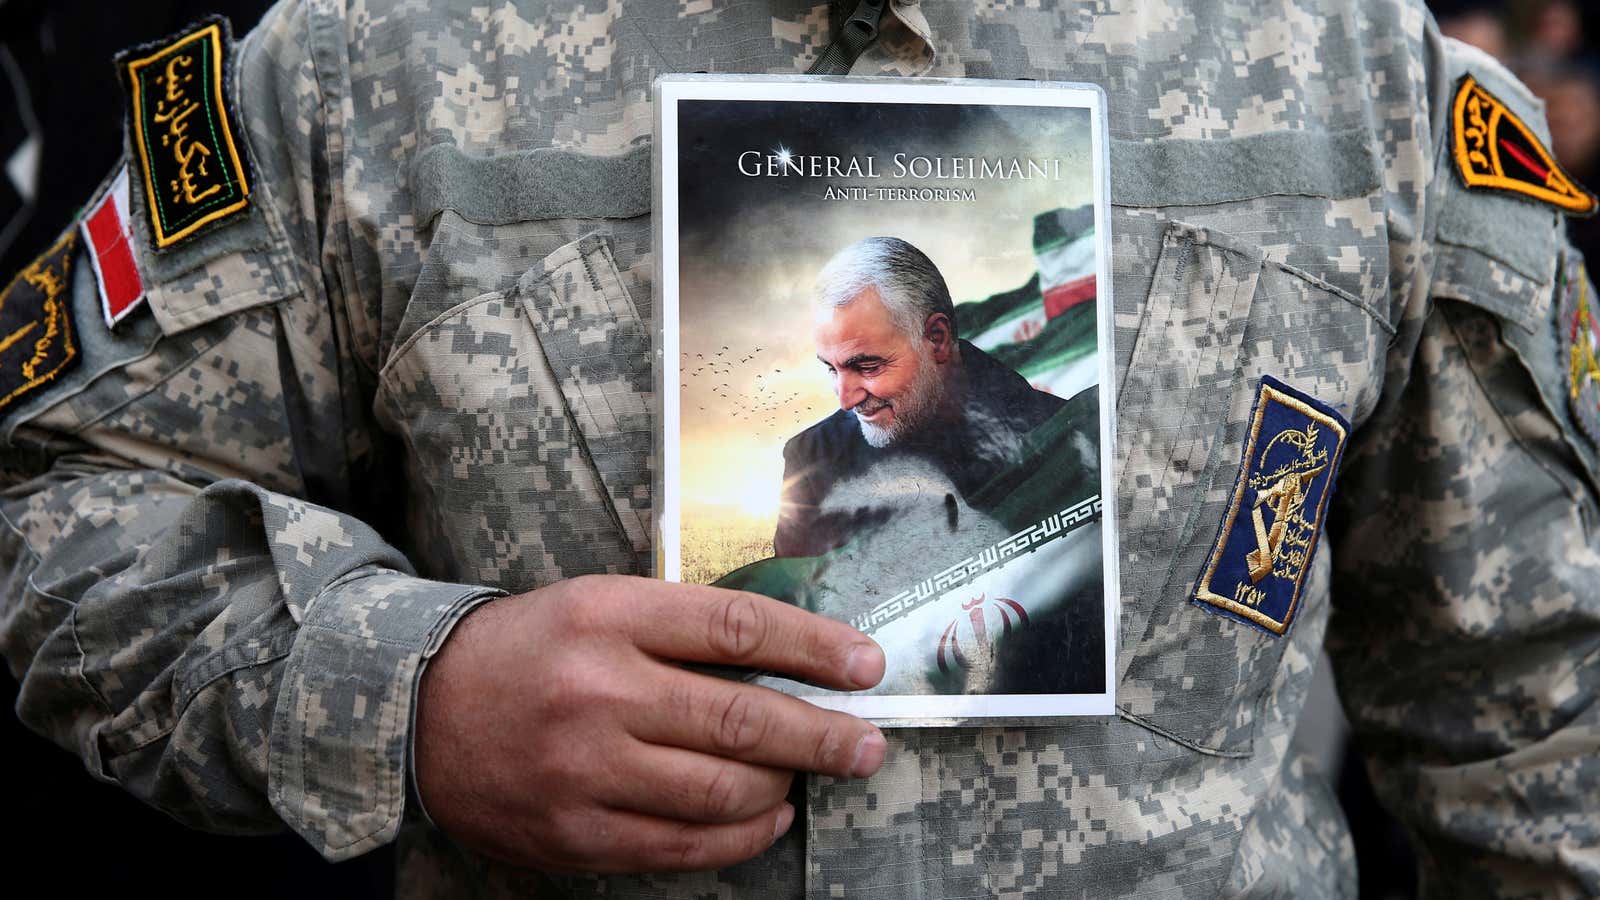 A demonstrator in Tehran holds a picture of Qassem Soleimani during a protest against the US assassination of the Iranian major general.